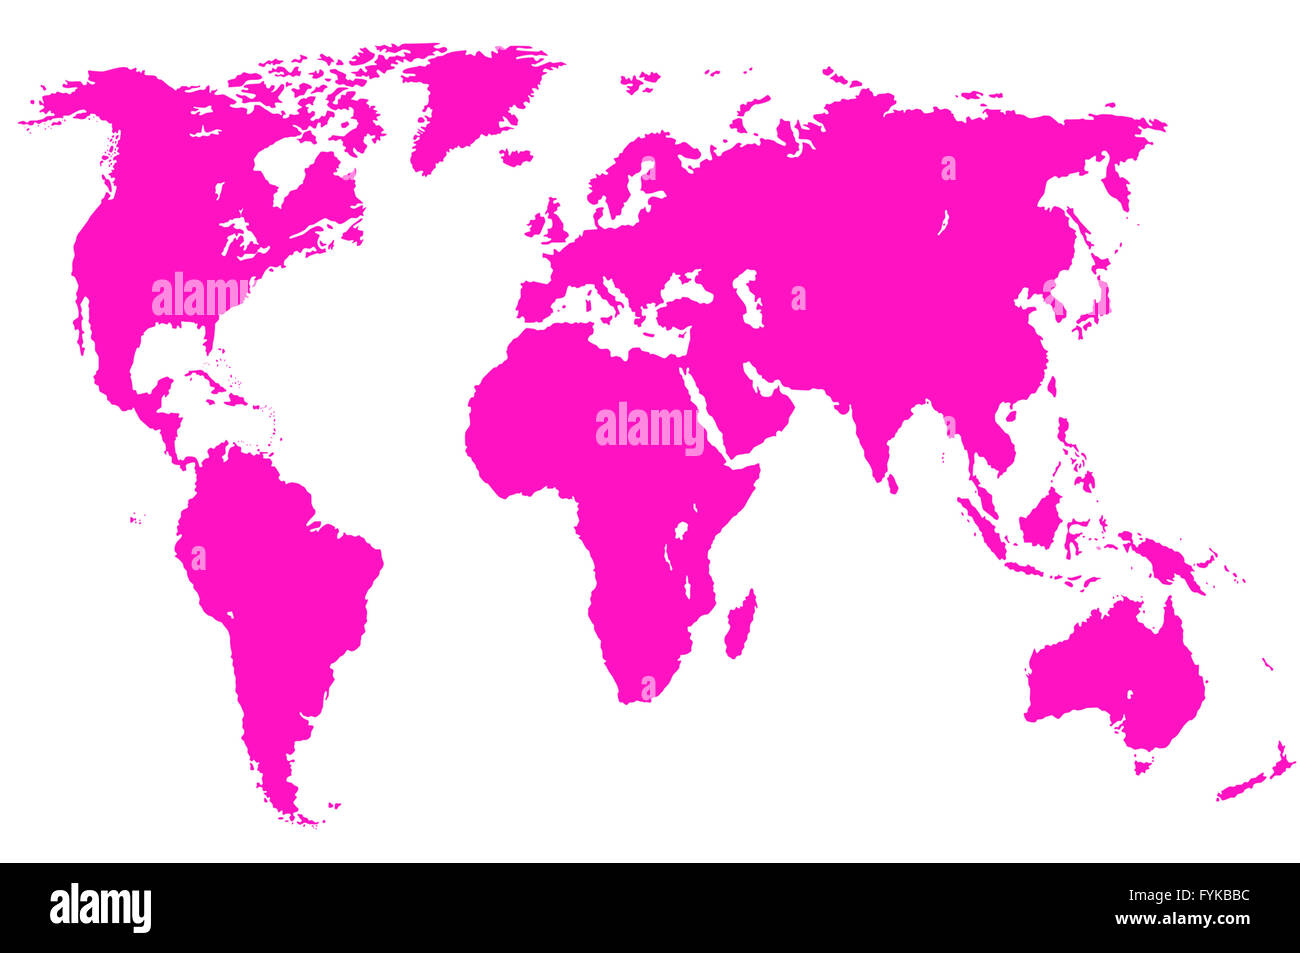 pink world map, isolated Stock Photo